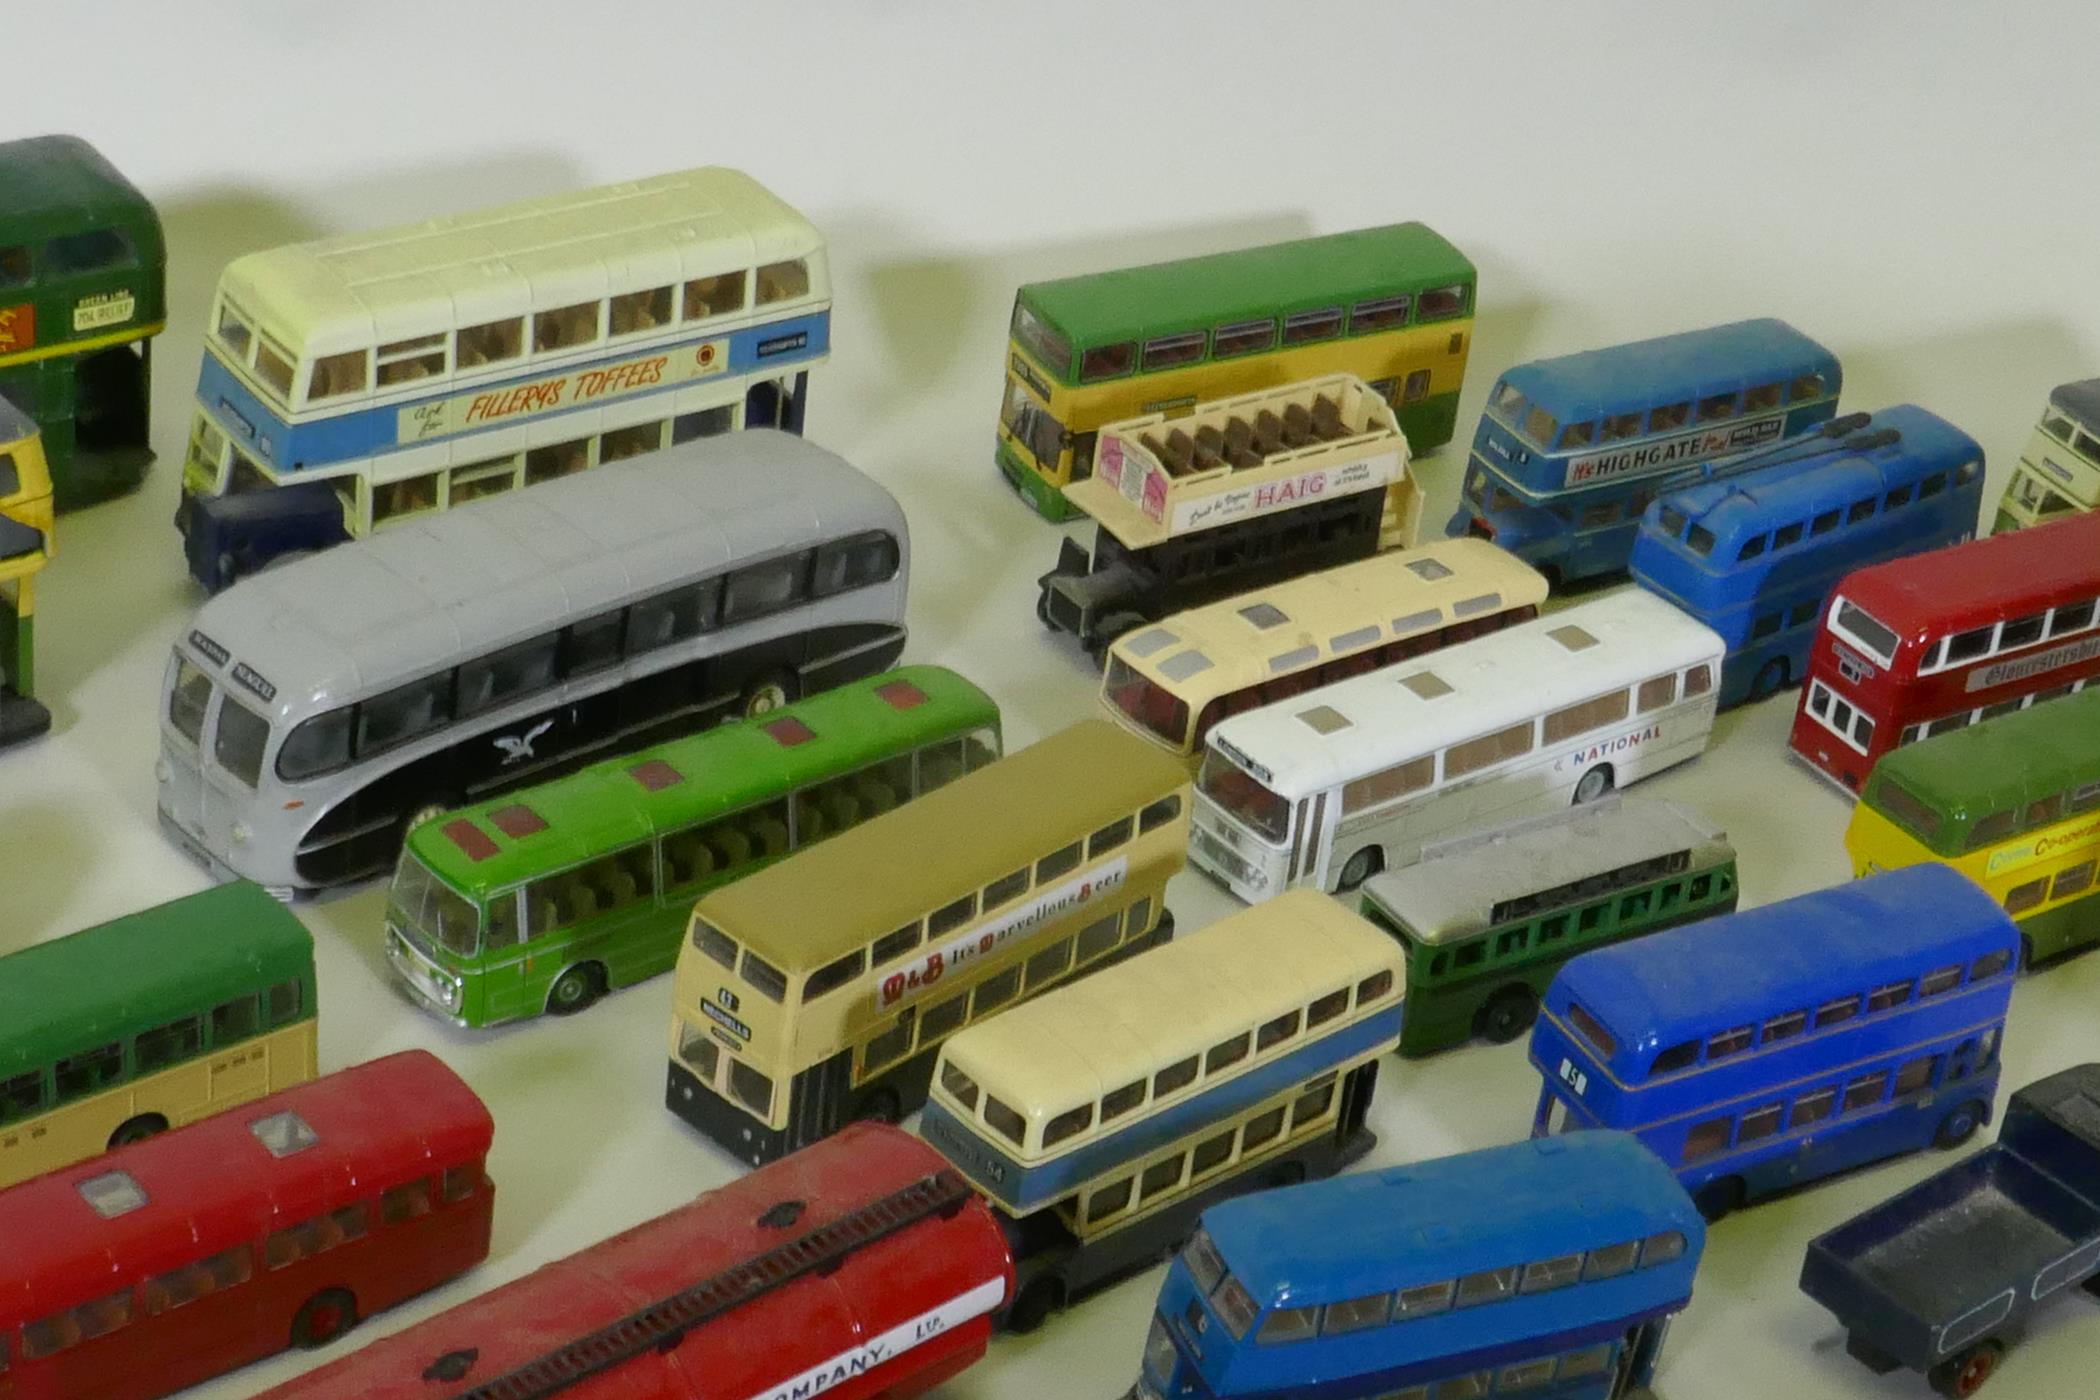 A quantity of collector's die cast model buses, trains, ships etc - Image 7 of 7